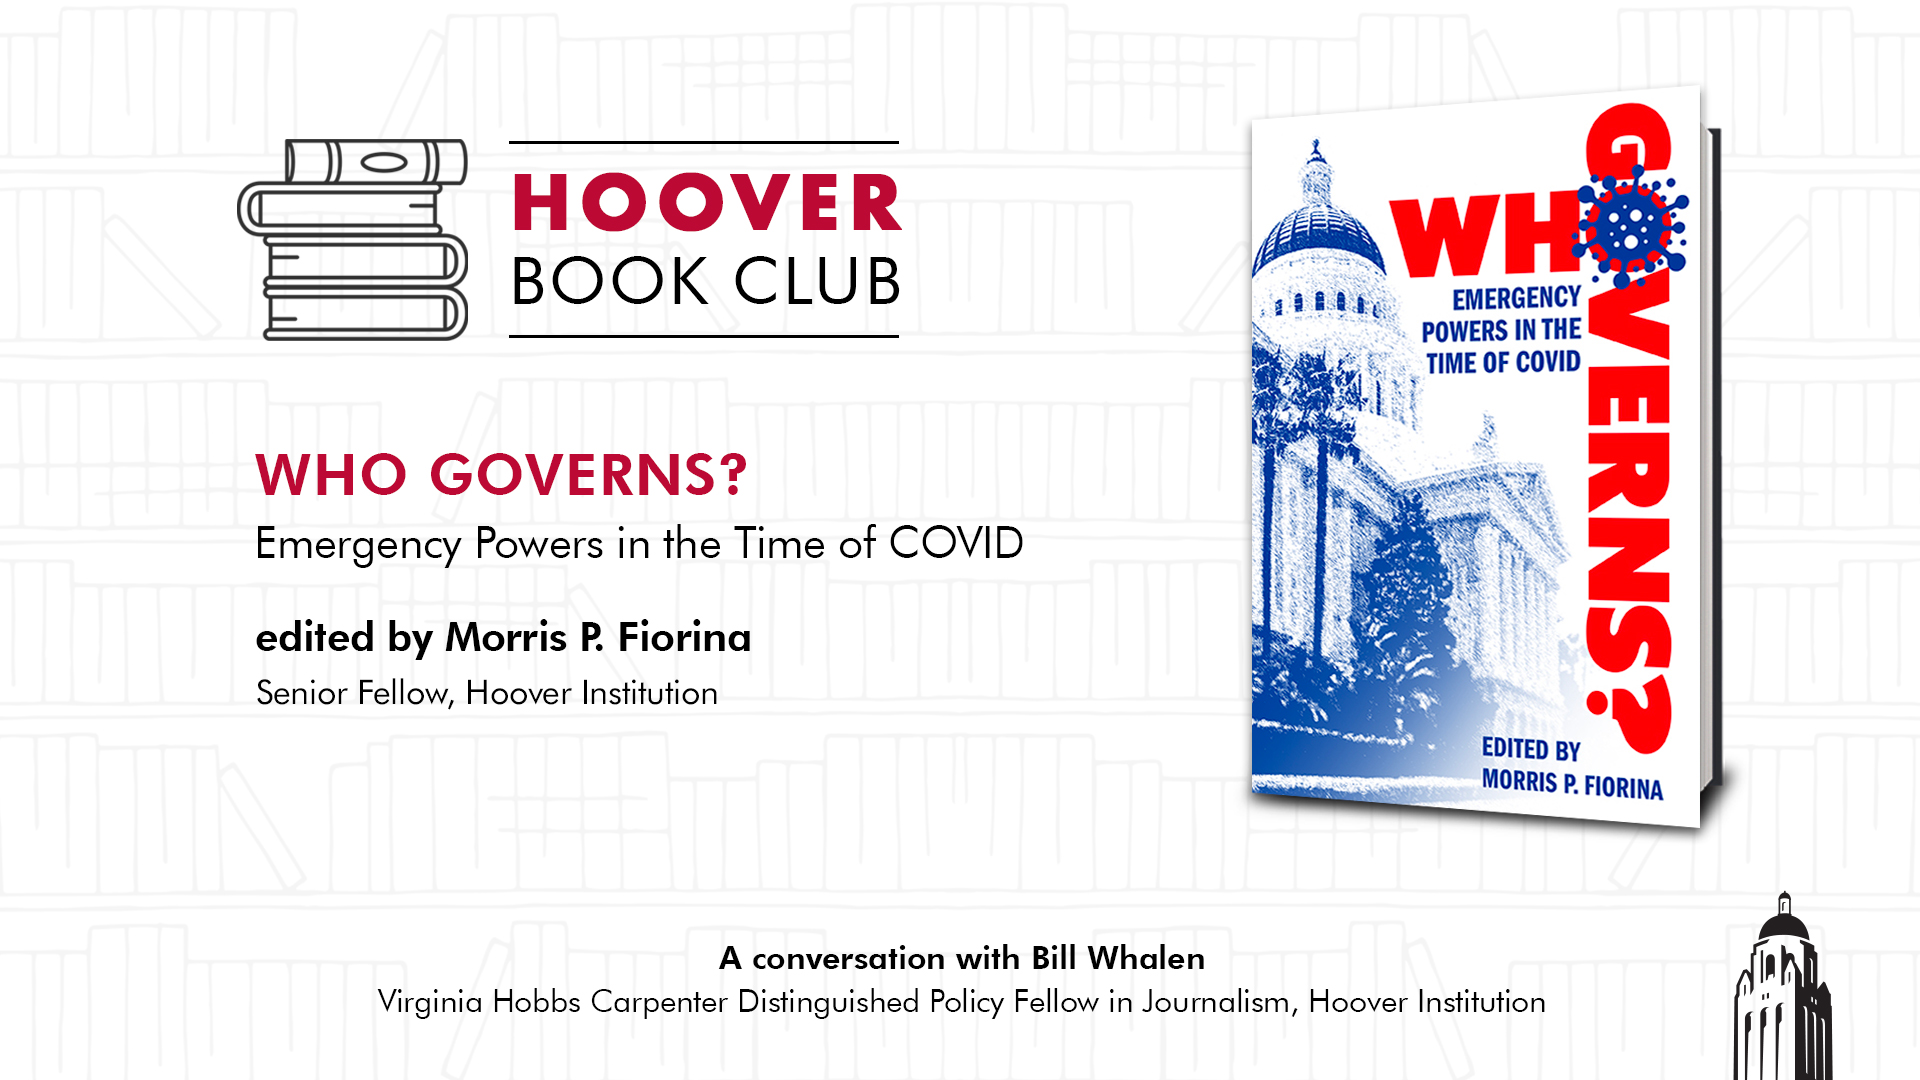 Hoover Book Club: Who Governs? Emergency Powers in the Time of COVID